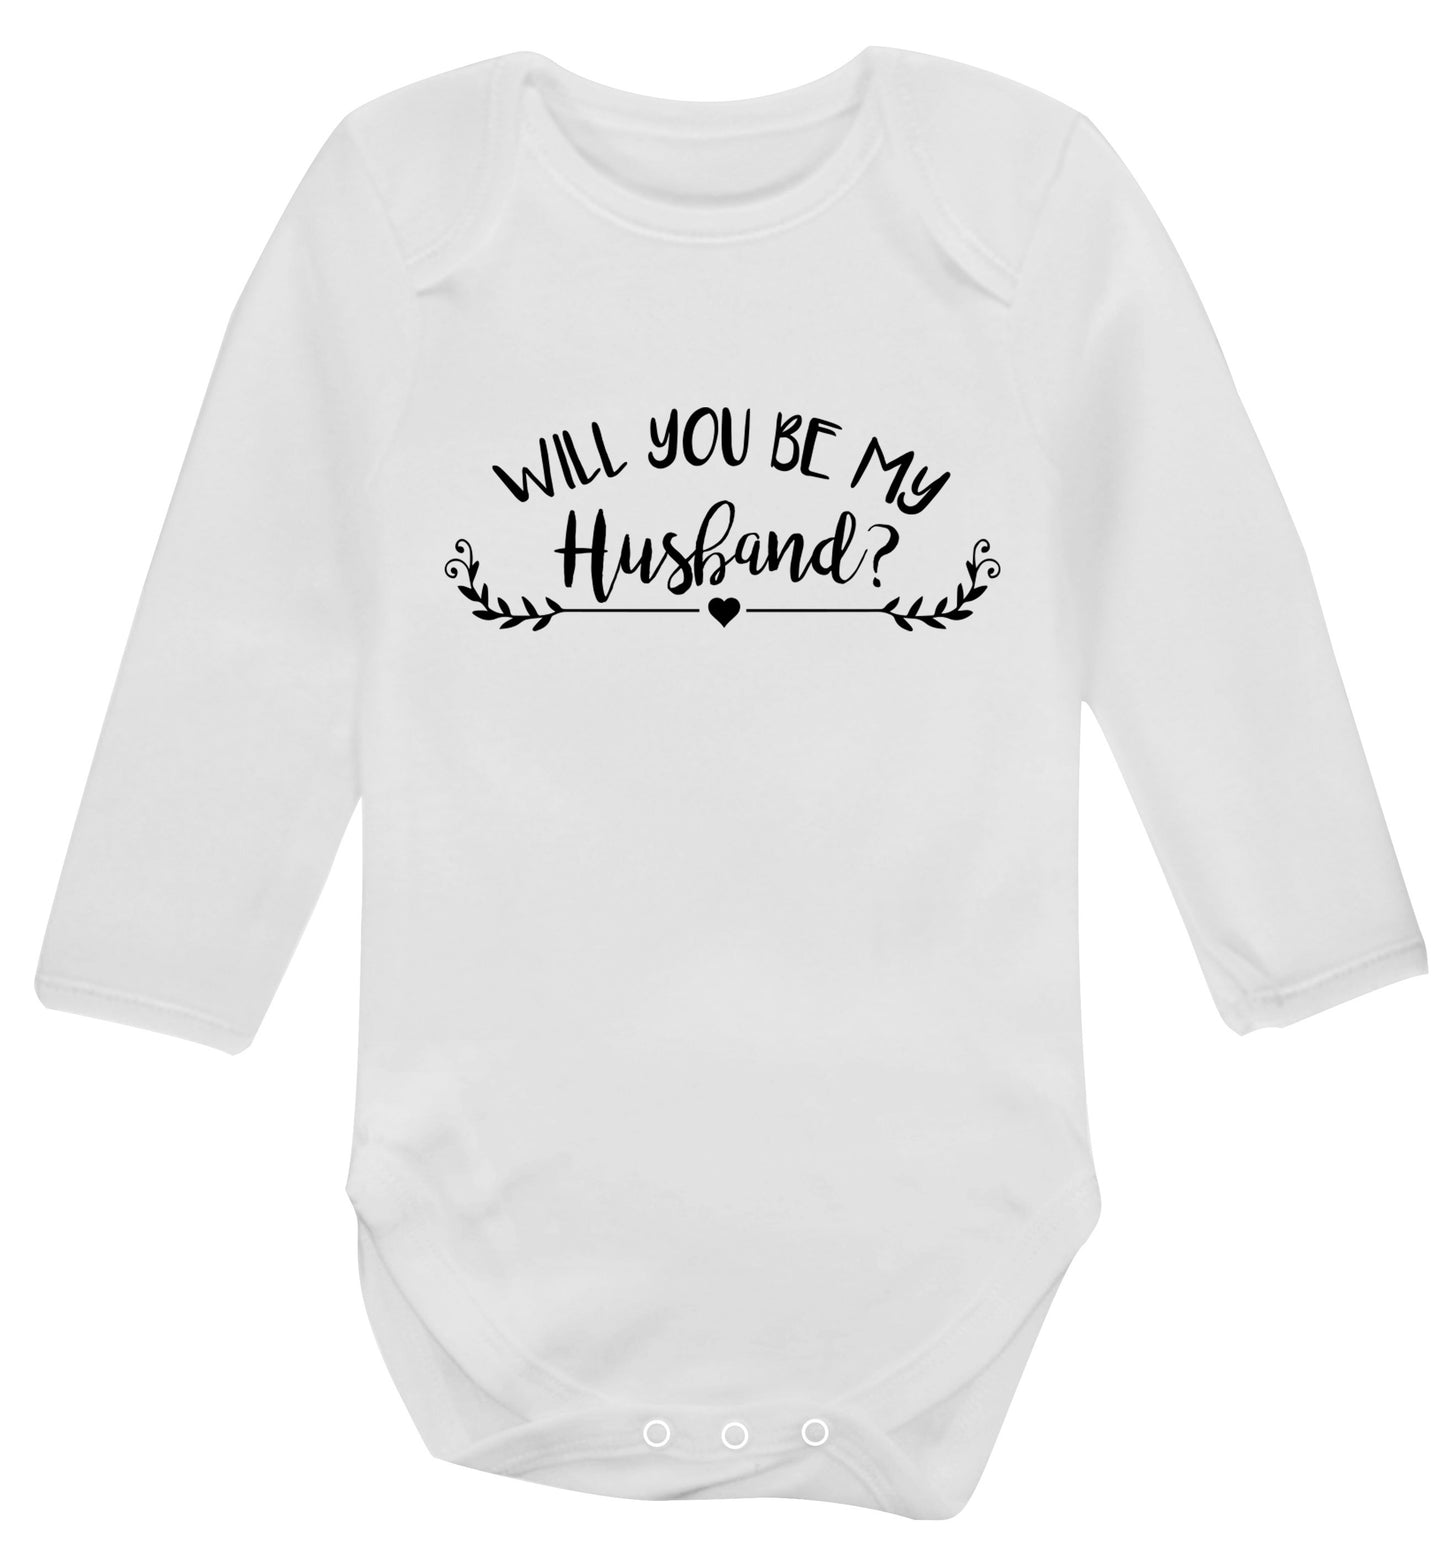 Will you be my husband? Baby Vest long sleeved white 6-12 months